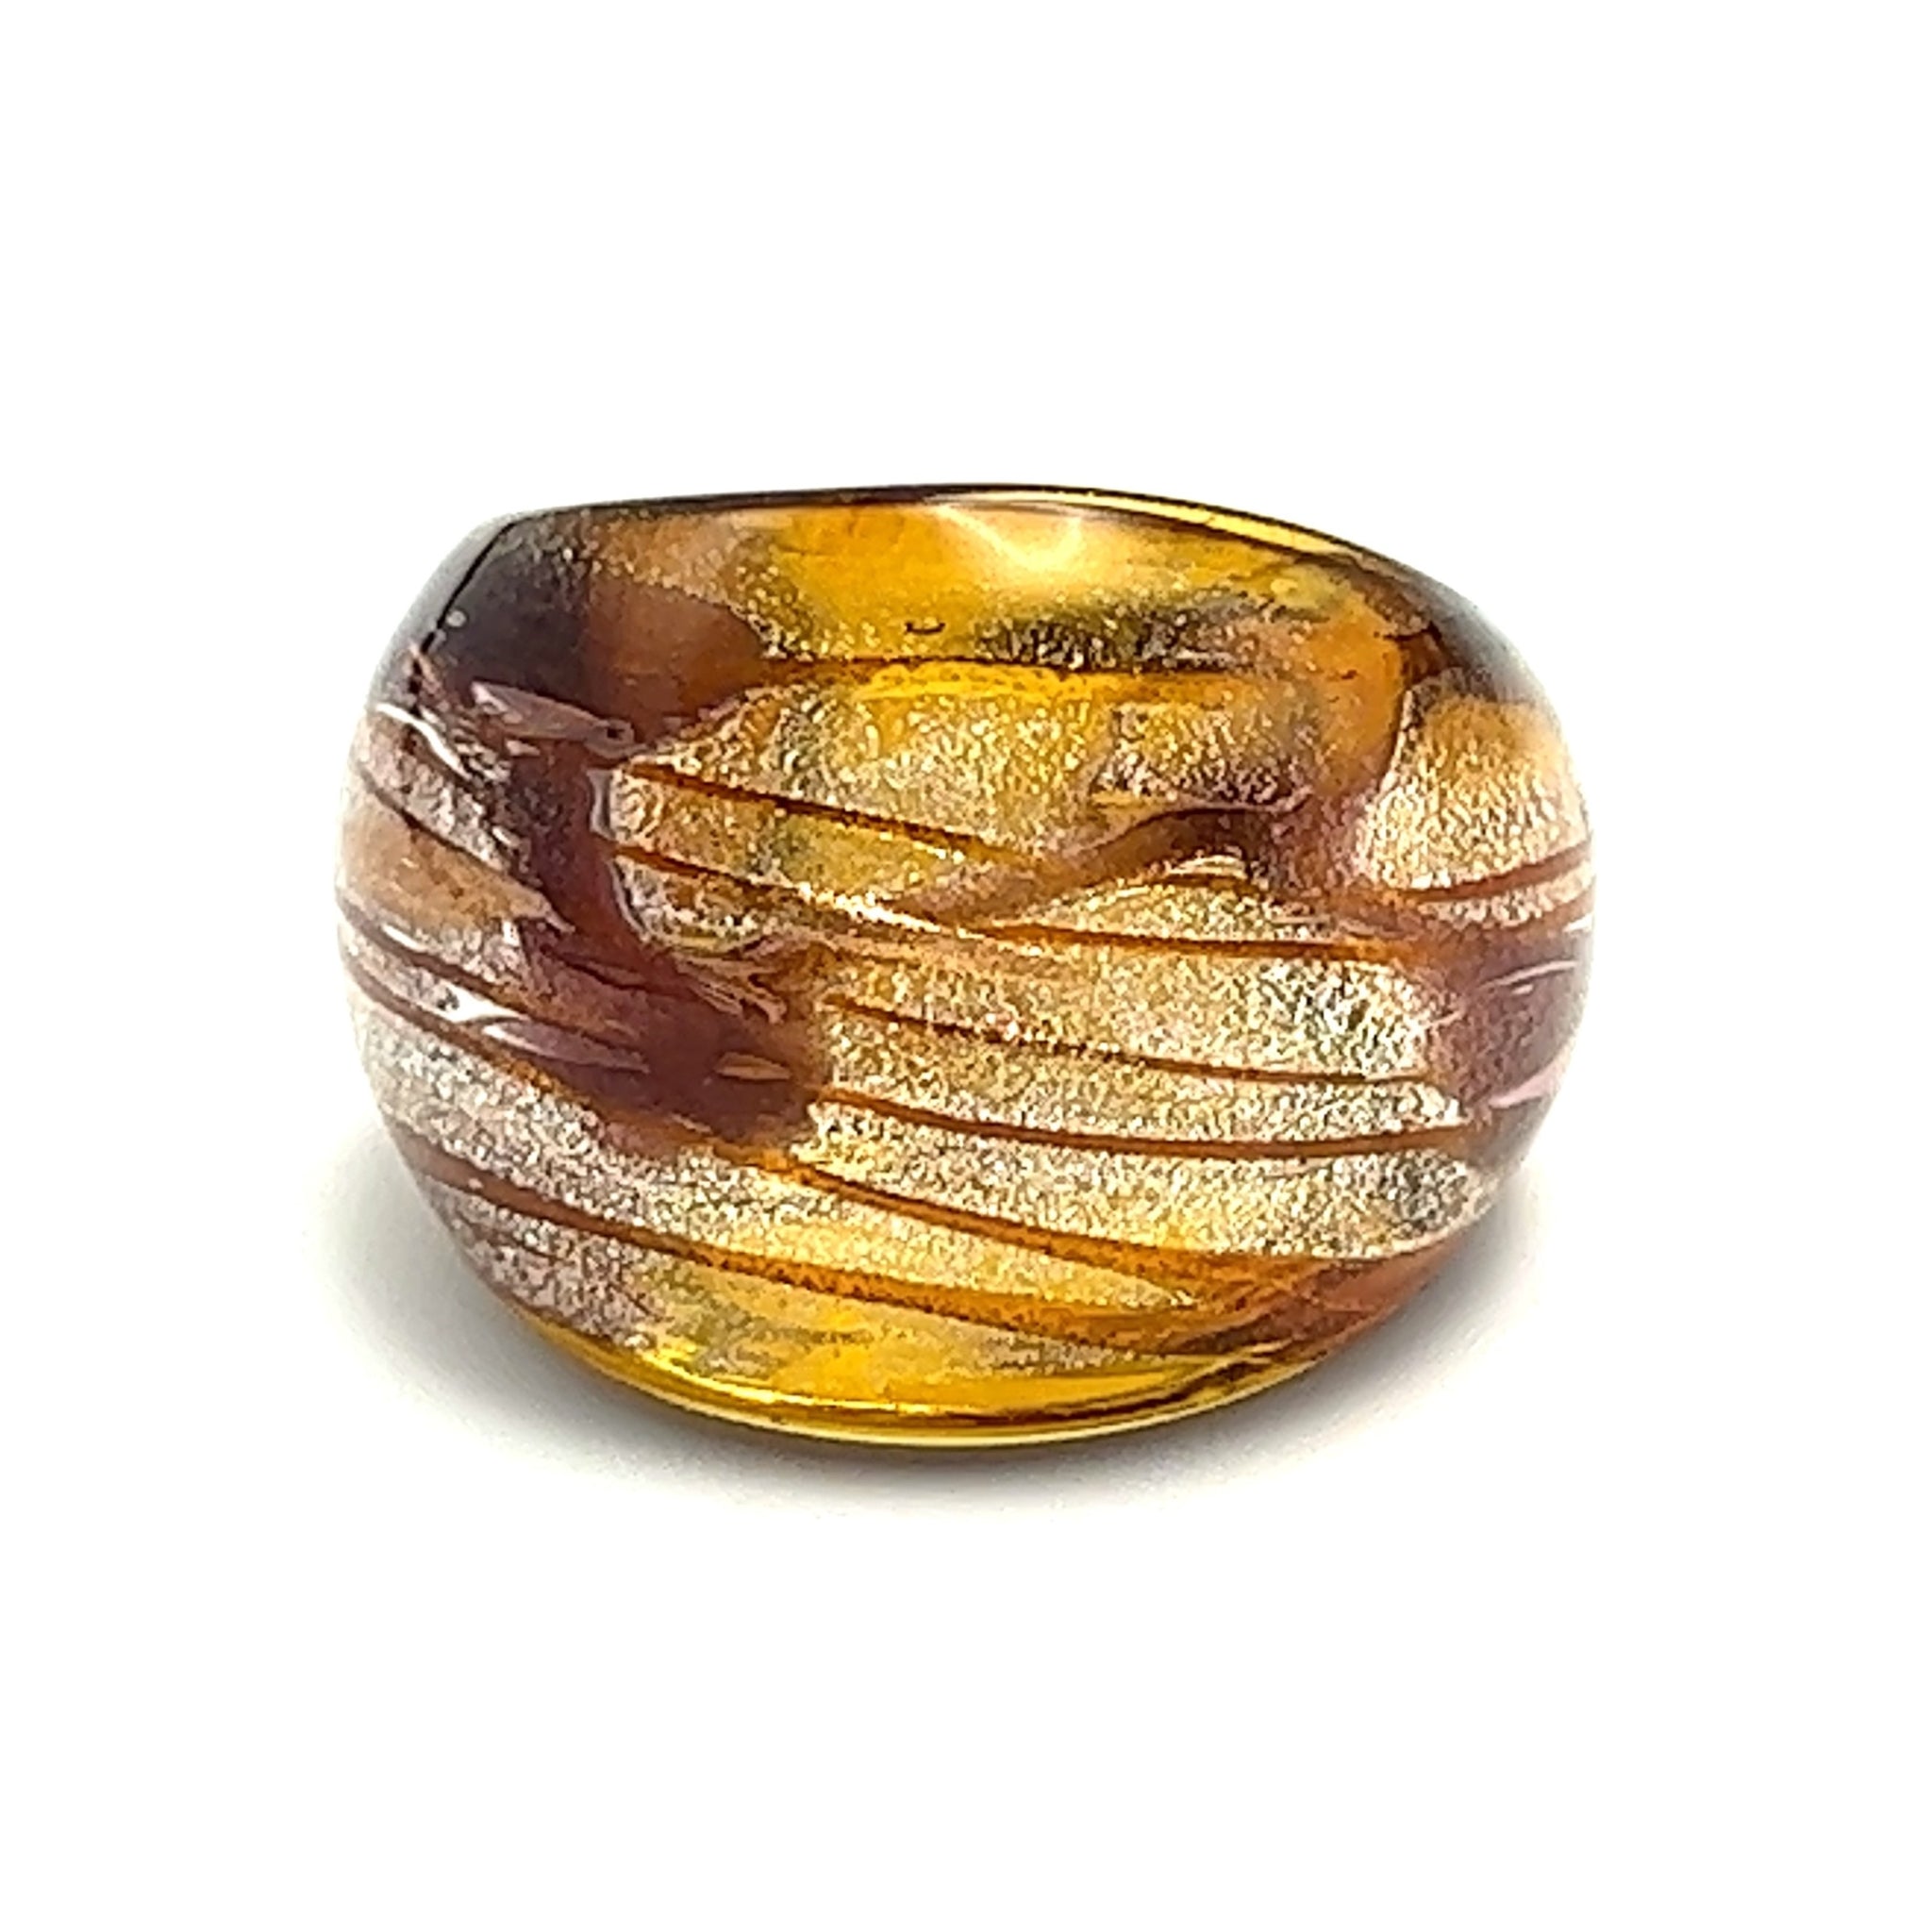 Handmade Glass Acrylic Ring Silver Radiance Amber Luster Infinity Band